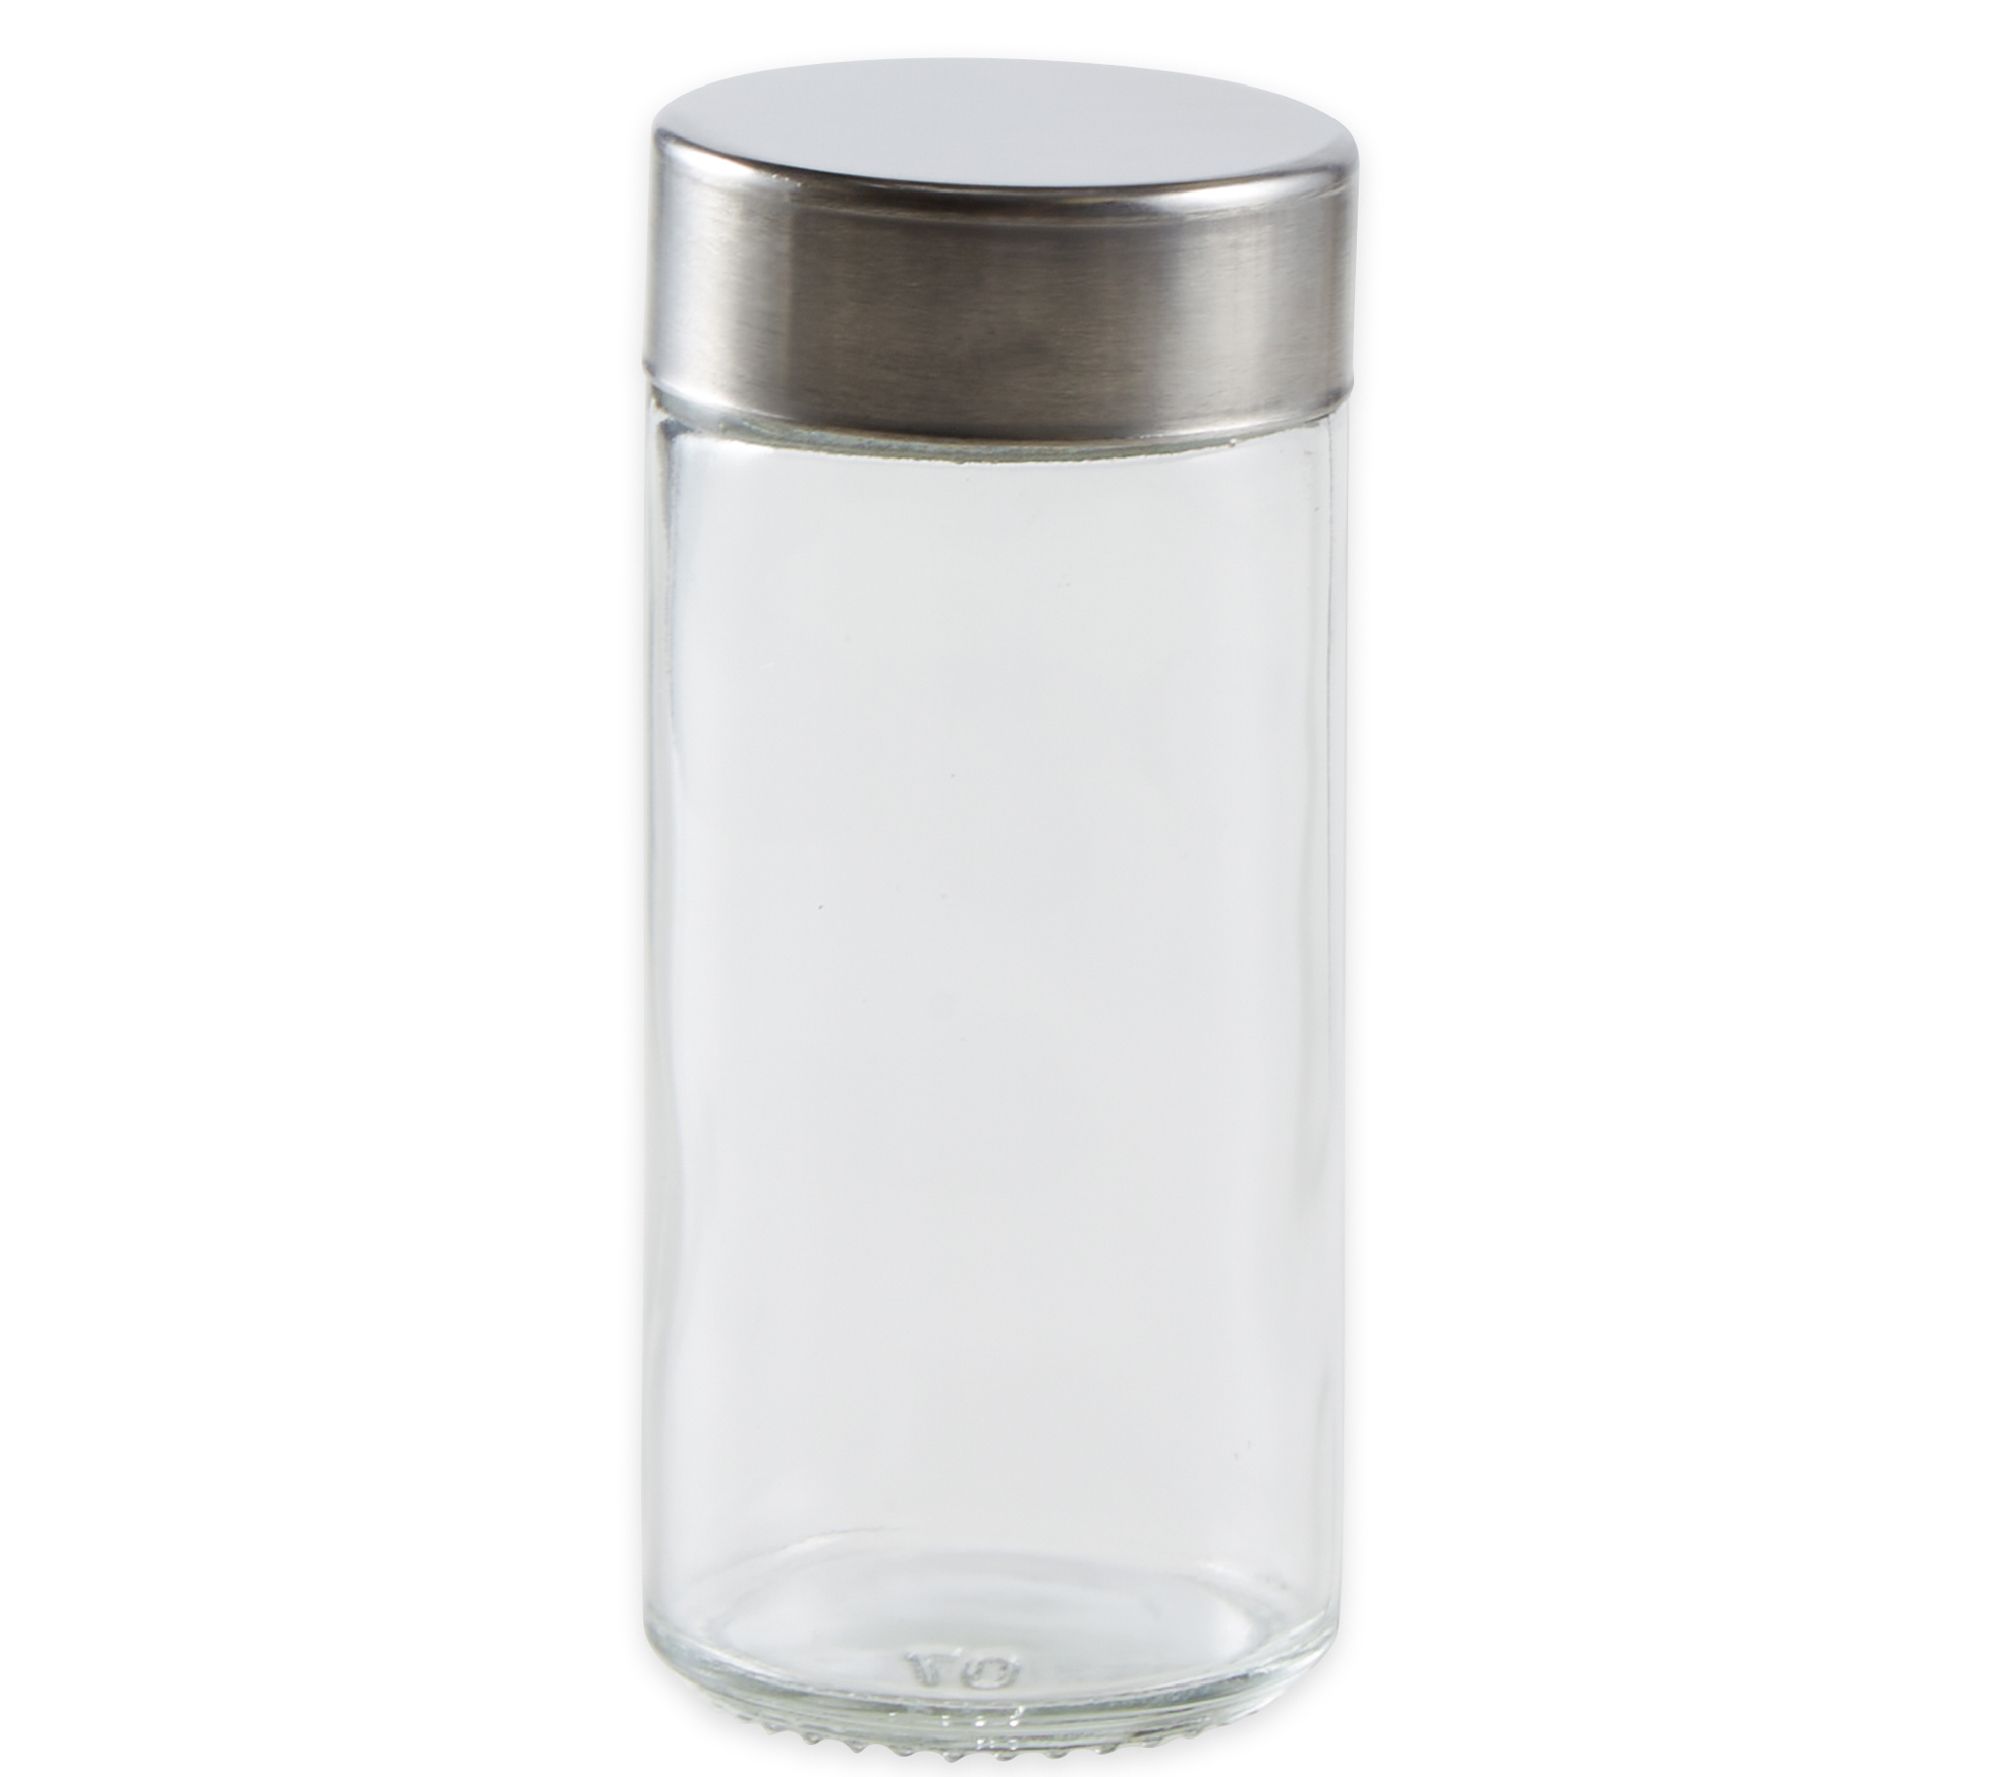 4 oz Clear Glass Spice Bottle with Shaker Lid and Pour/Spoon Dispenser